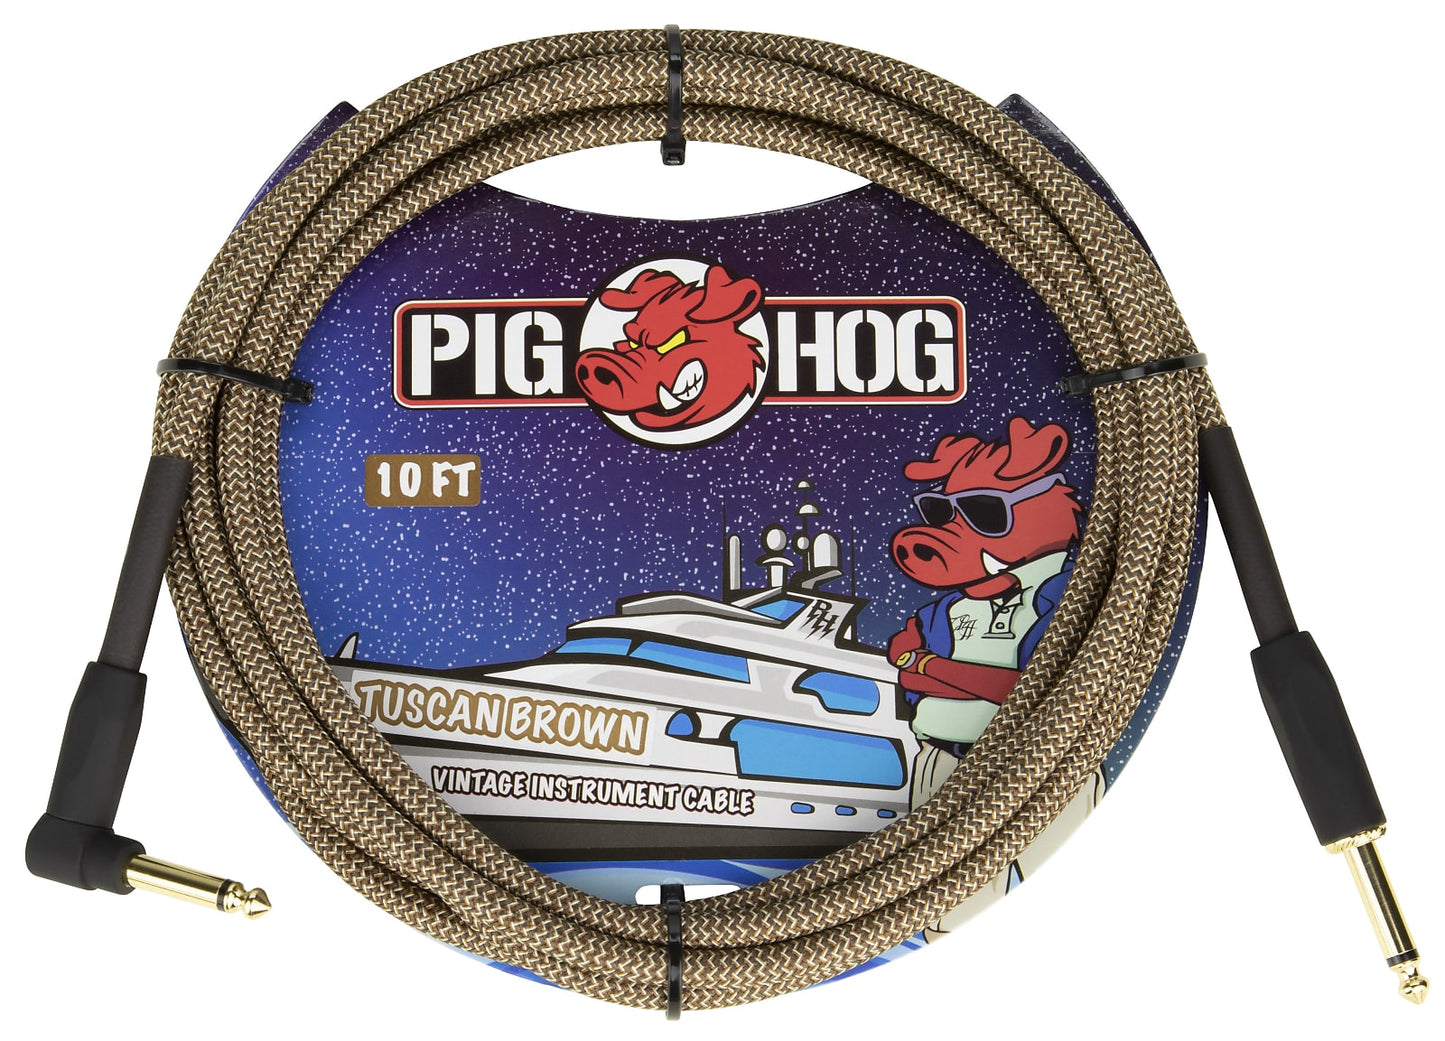 Pig Hog Tuscan Brown Vintage Instrument Cable 10ft Right Angle